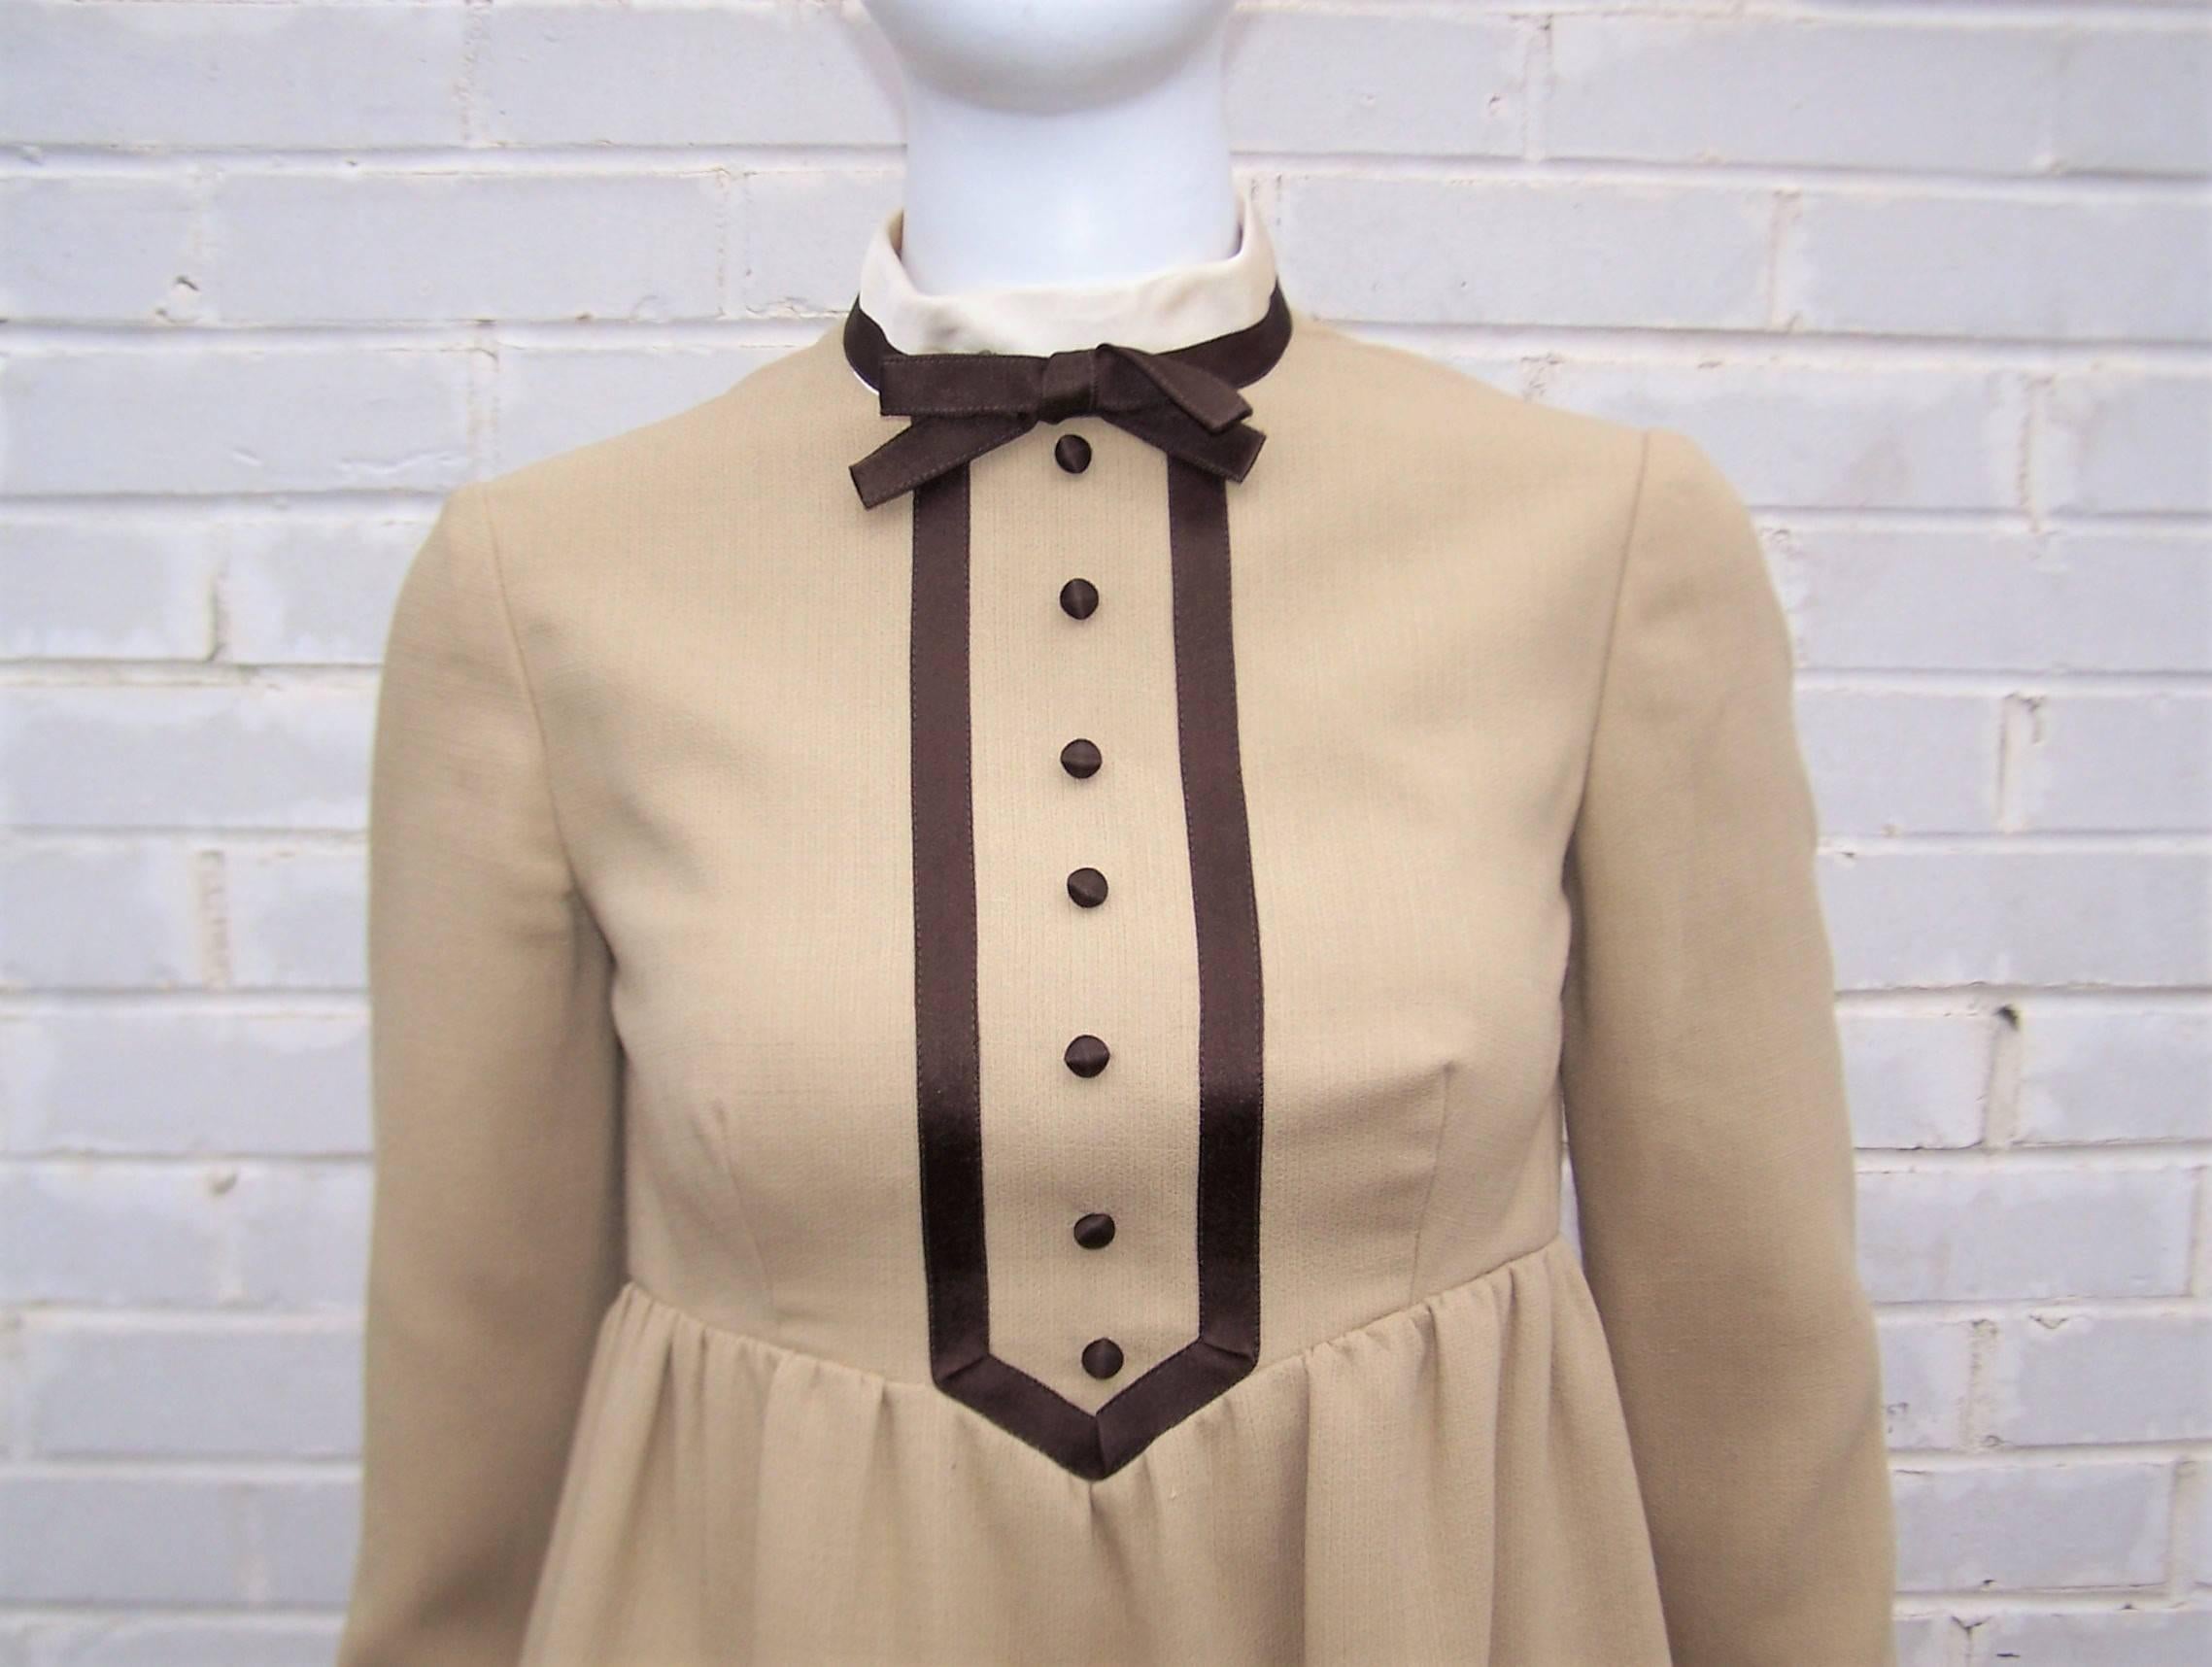 This 1960's Geoffrey Beene design is the epitome of girlish charm.  The comfortable beige wool blend fabric is accented by ivory and brown satin details at the neck and cuffs.  It zips and hooks at the back with an interior grosgrain waistband and